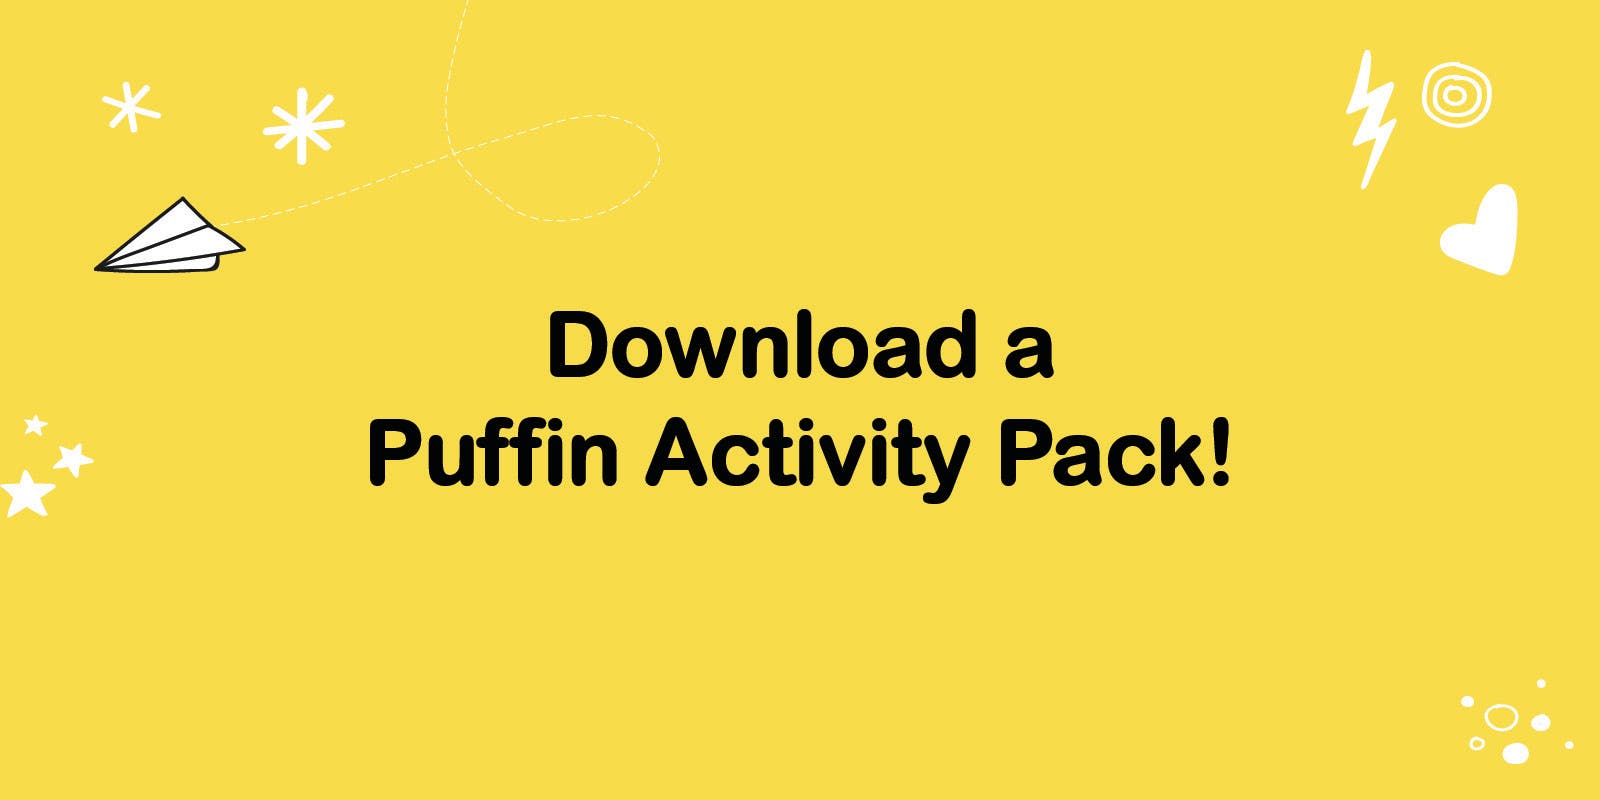 Download a Puffin activity pack!